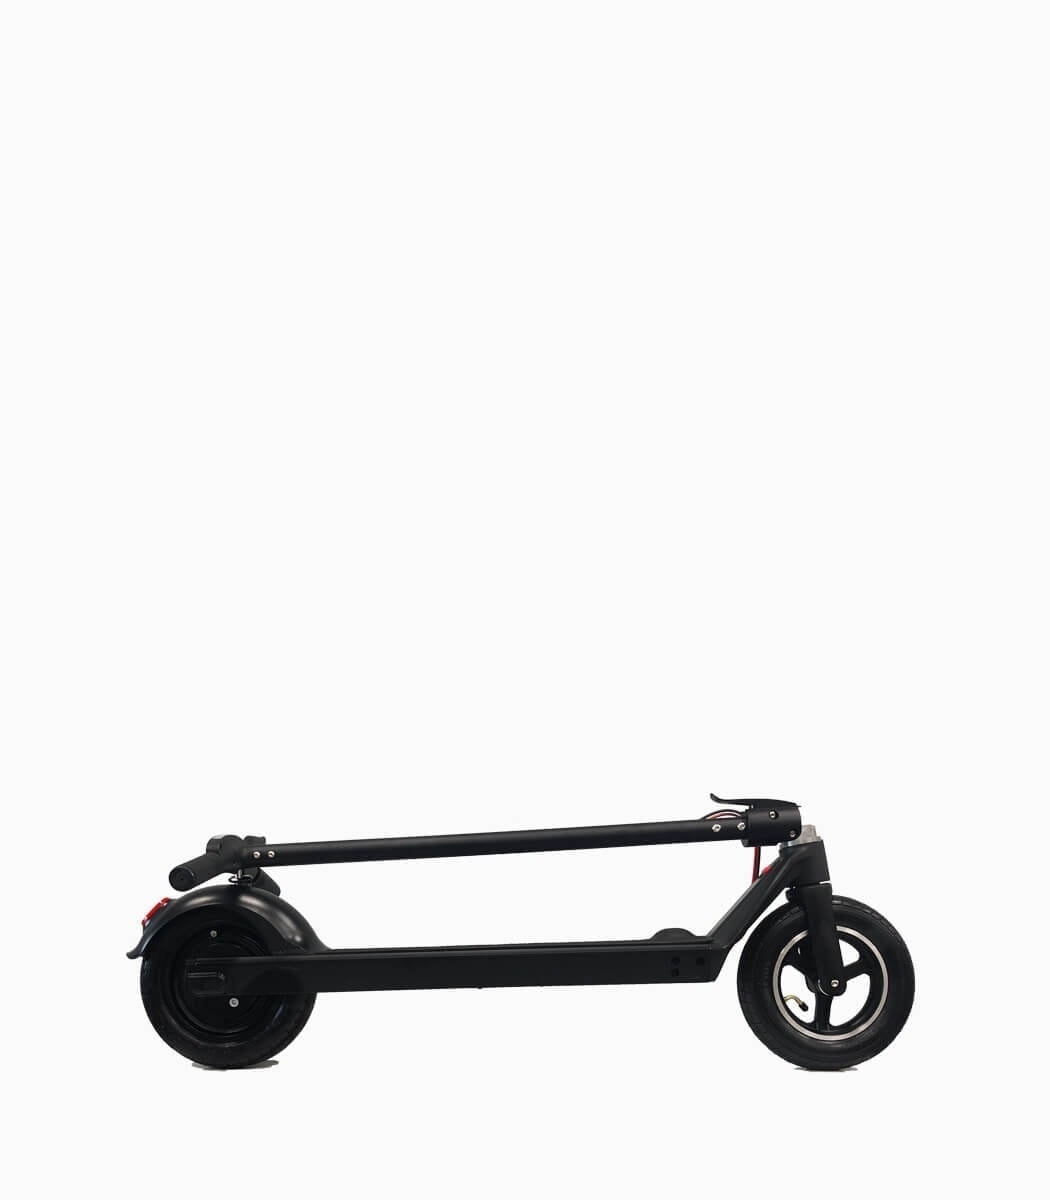 MOBOT F16 (BLACK5.2AH) UL2272 certified e-scooter black folded right